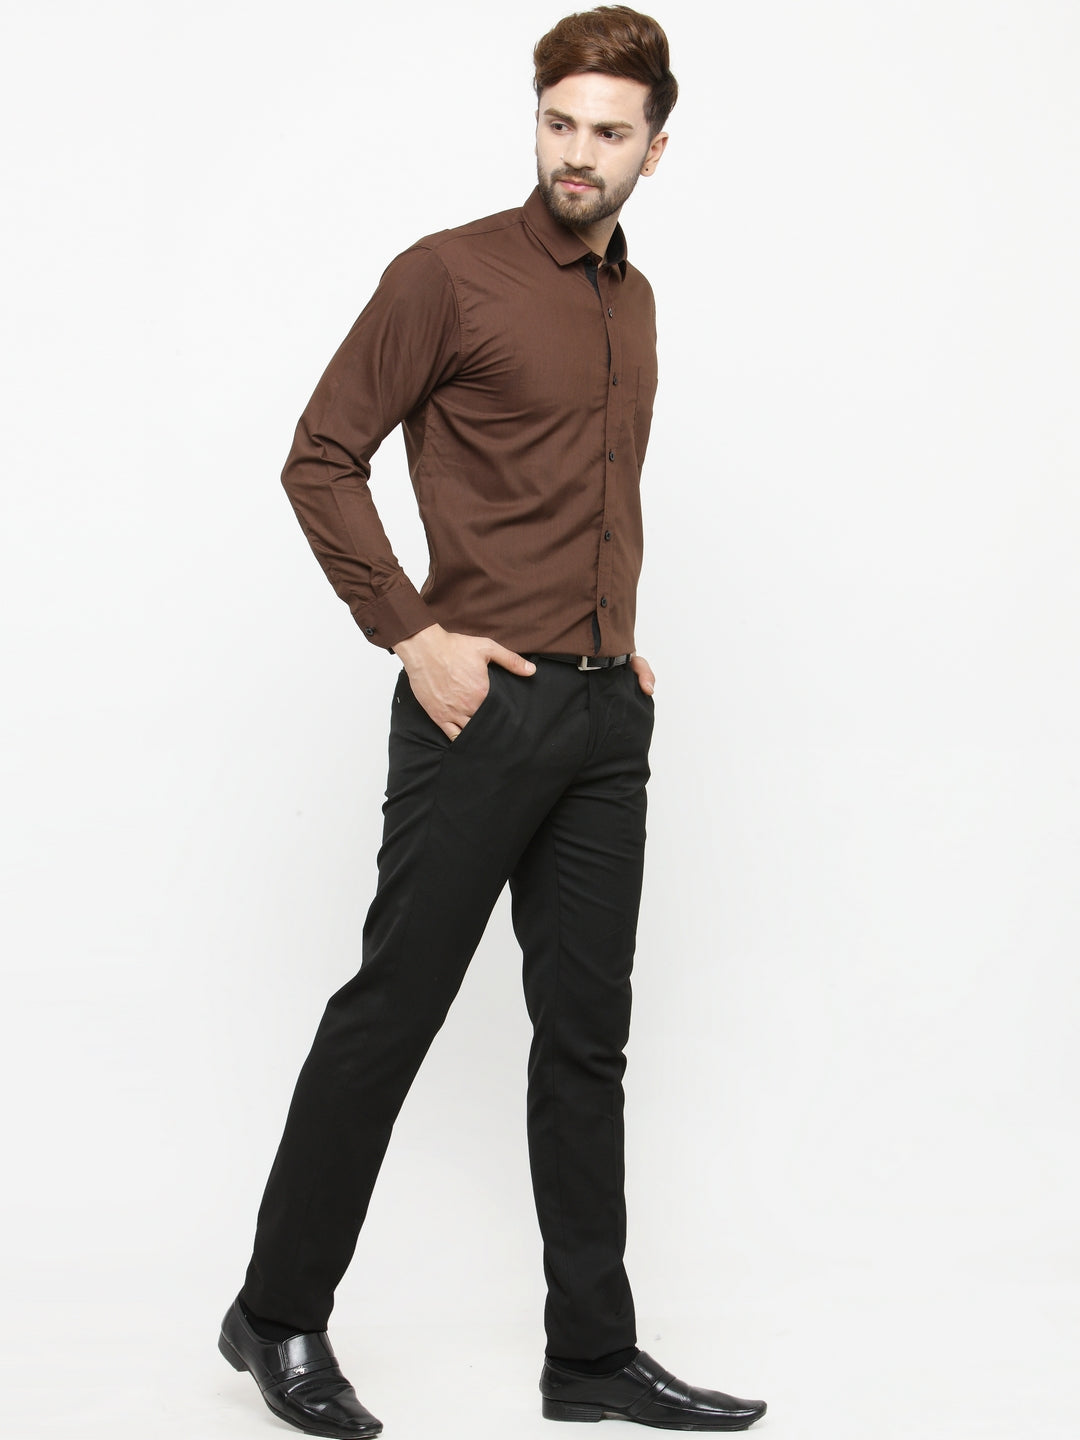 What color jeans match with a brown shirt? - Quora